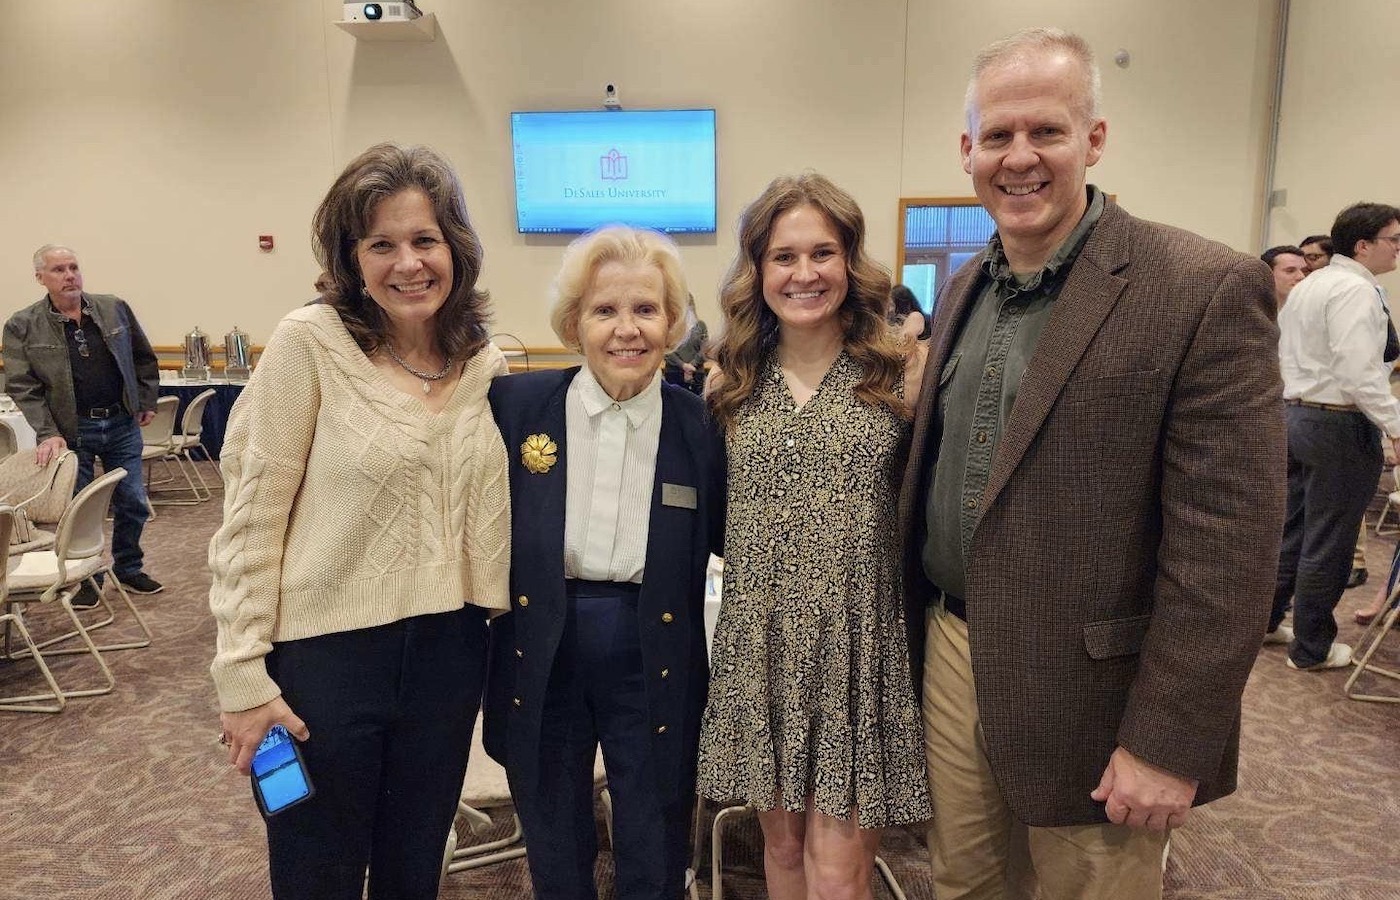 Mary Bushner posing with her parents and Karen Walton